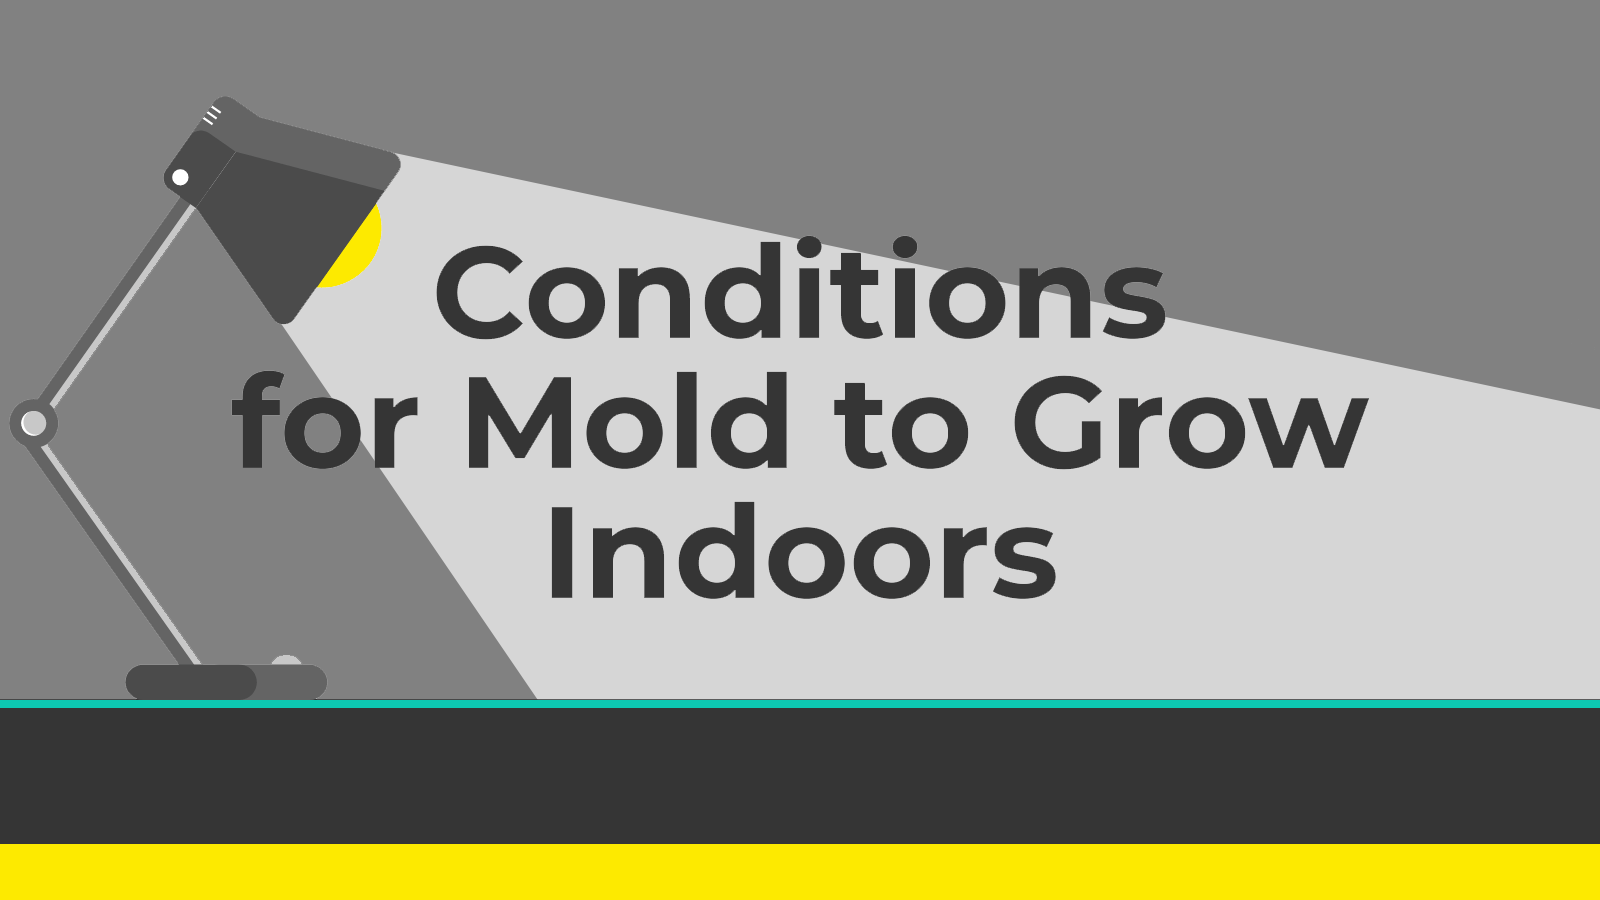 Conditions for Mold to Grow Indoors